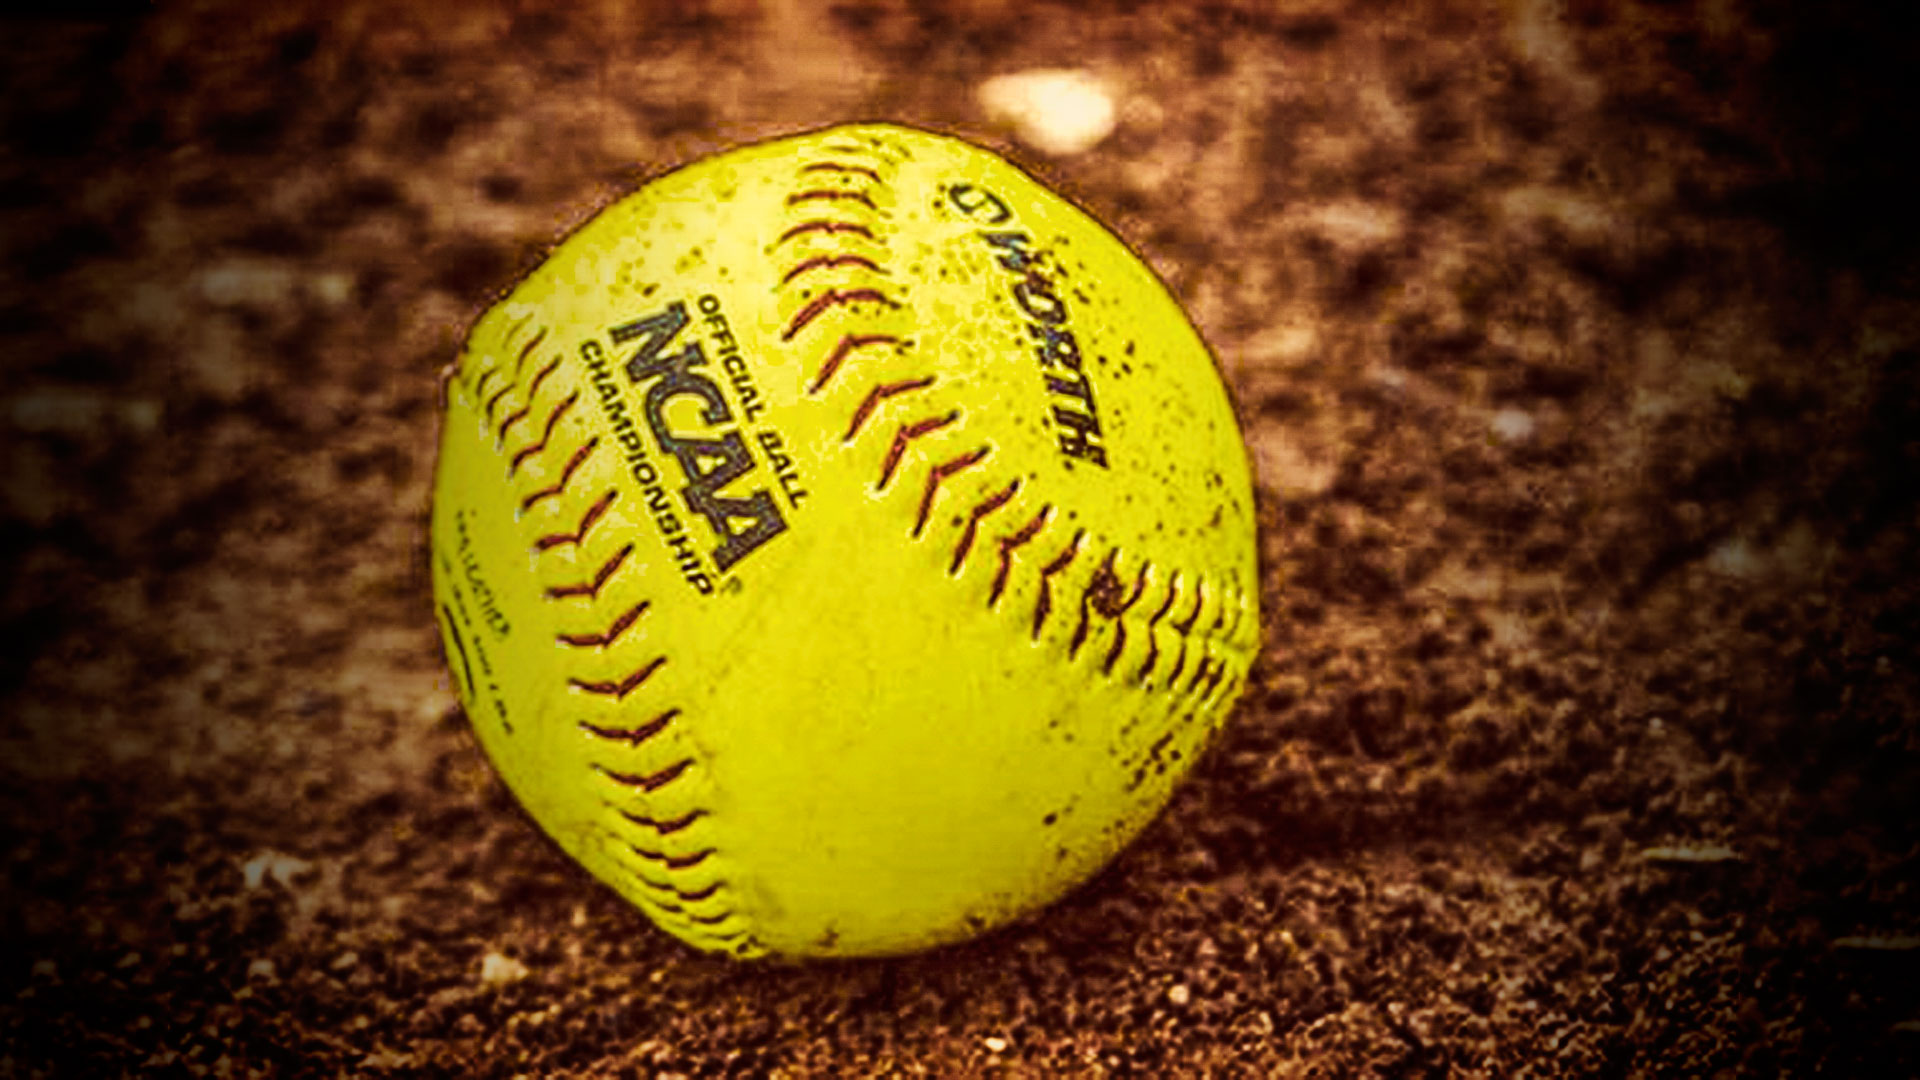 HD wallpaper softball pitcher female game pitching circle field  competition  Wallpaper Flare